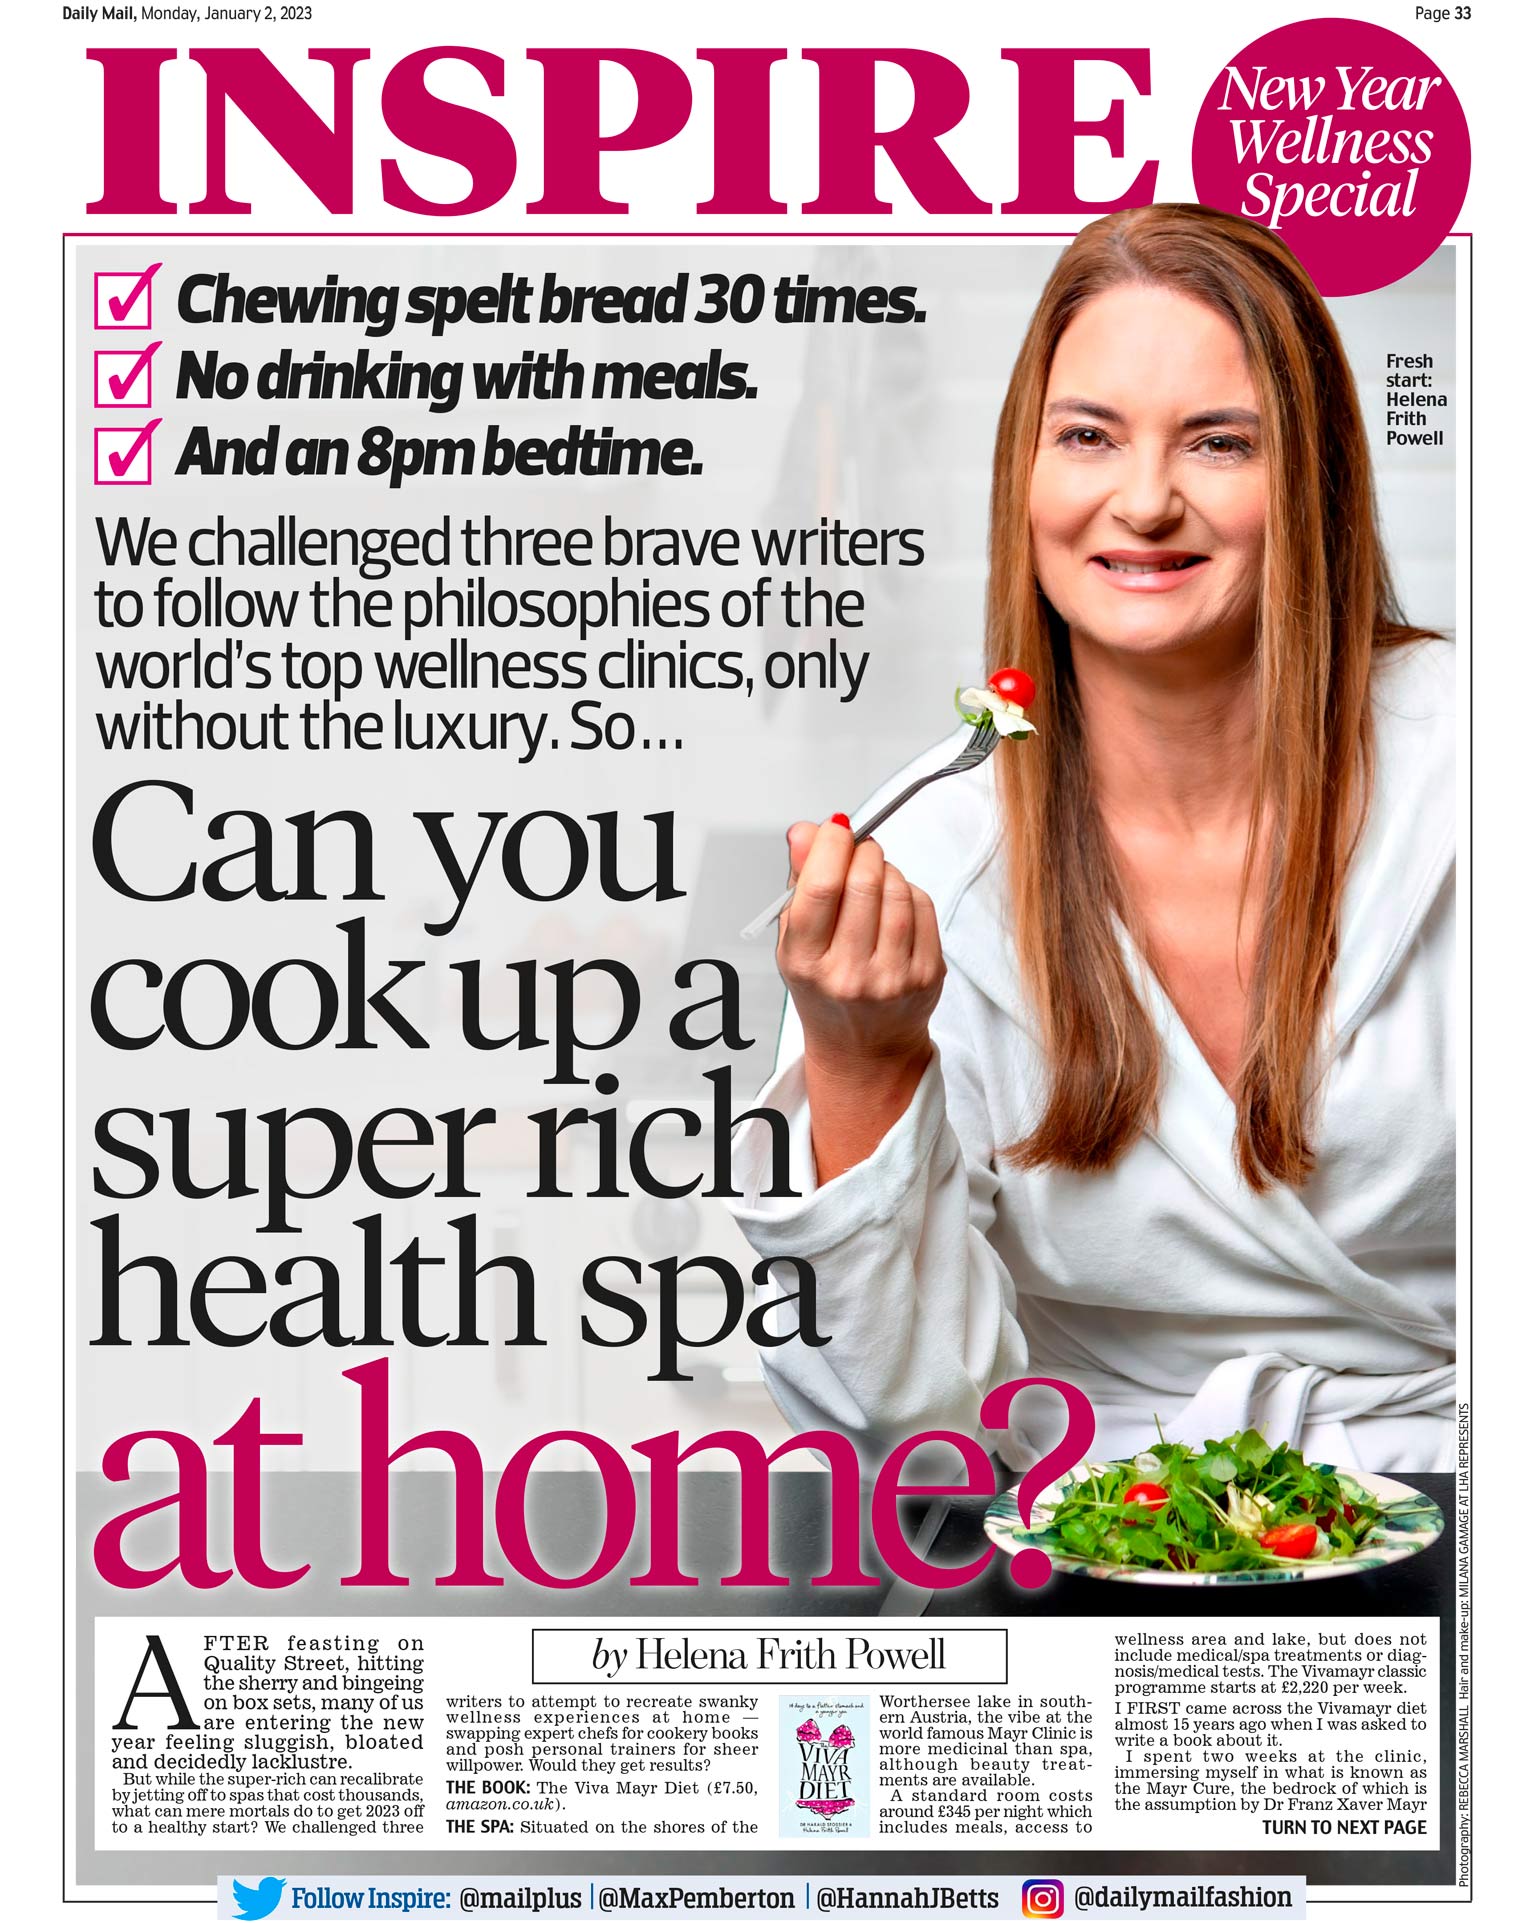 Front cover tearsheet of Daily Mail's Inspire, showing a woman eating salad in a white bathrobe